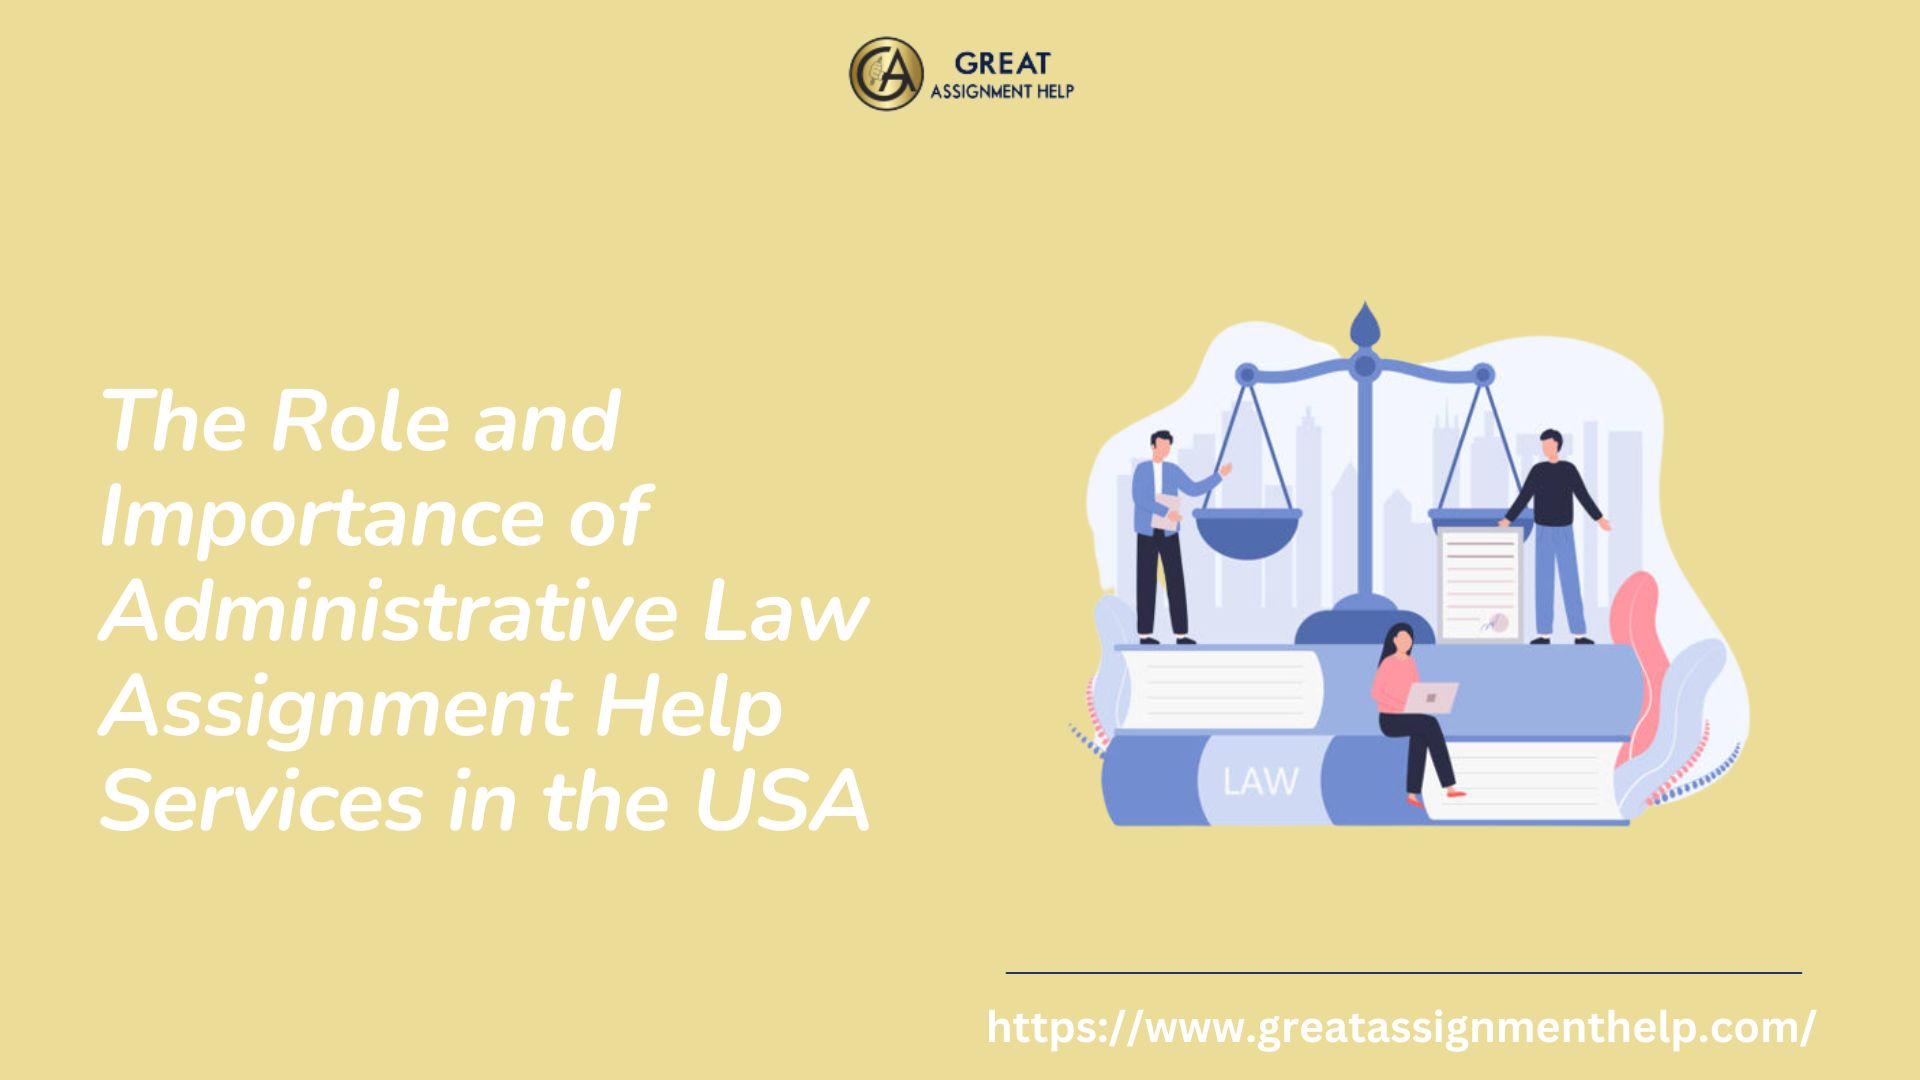 Administrative Law Assignment Help